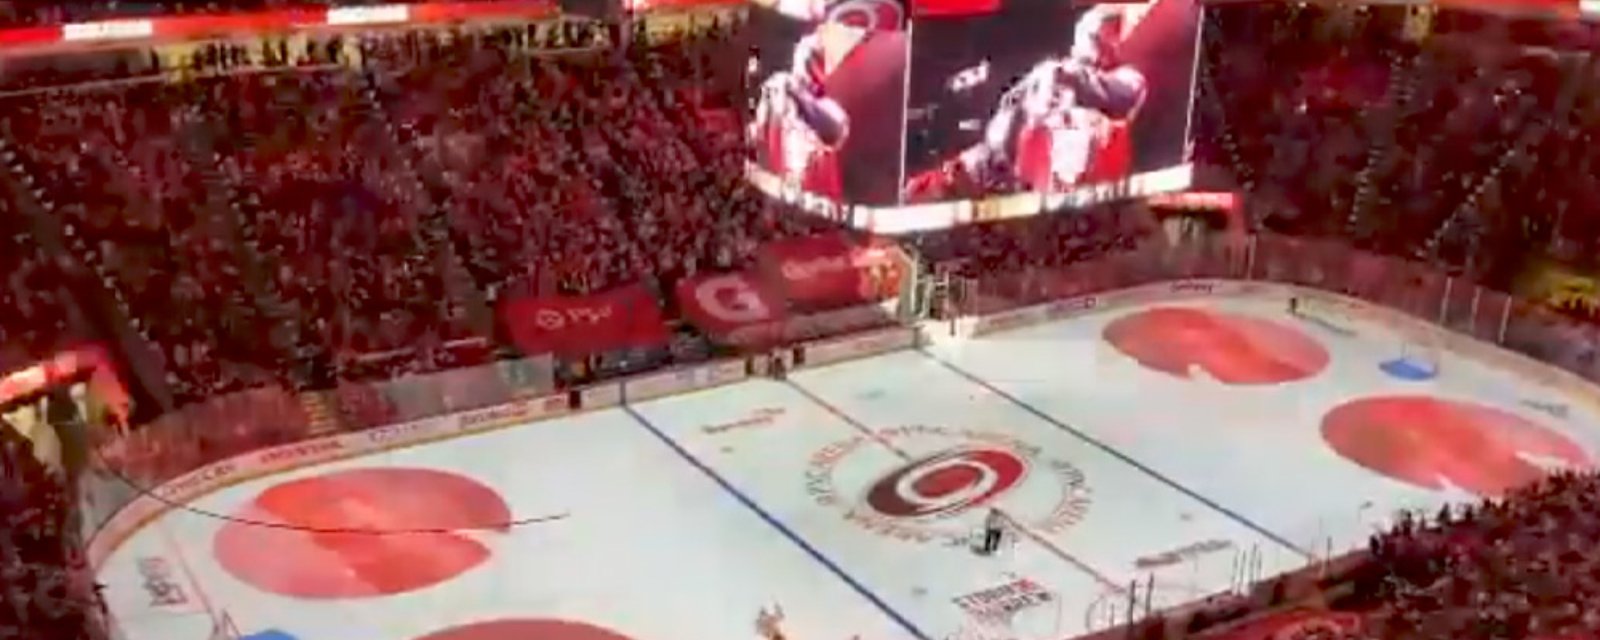 The Caniacs are once again rocking PNC Arena 